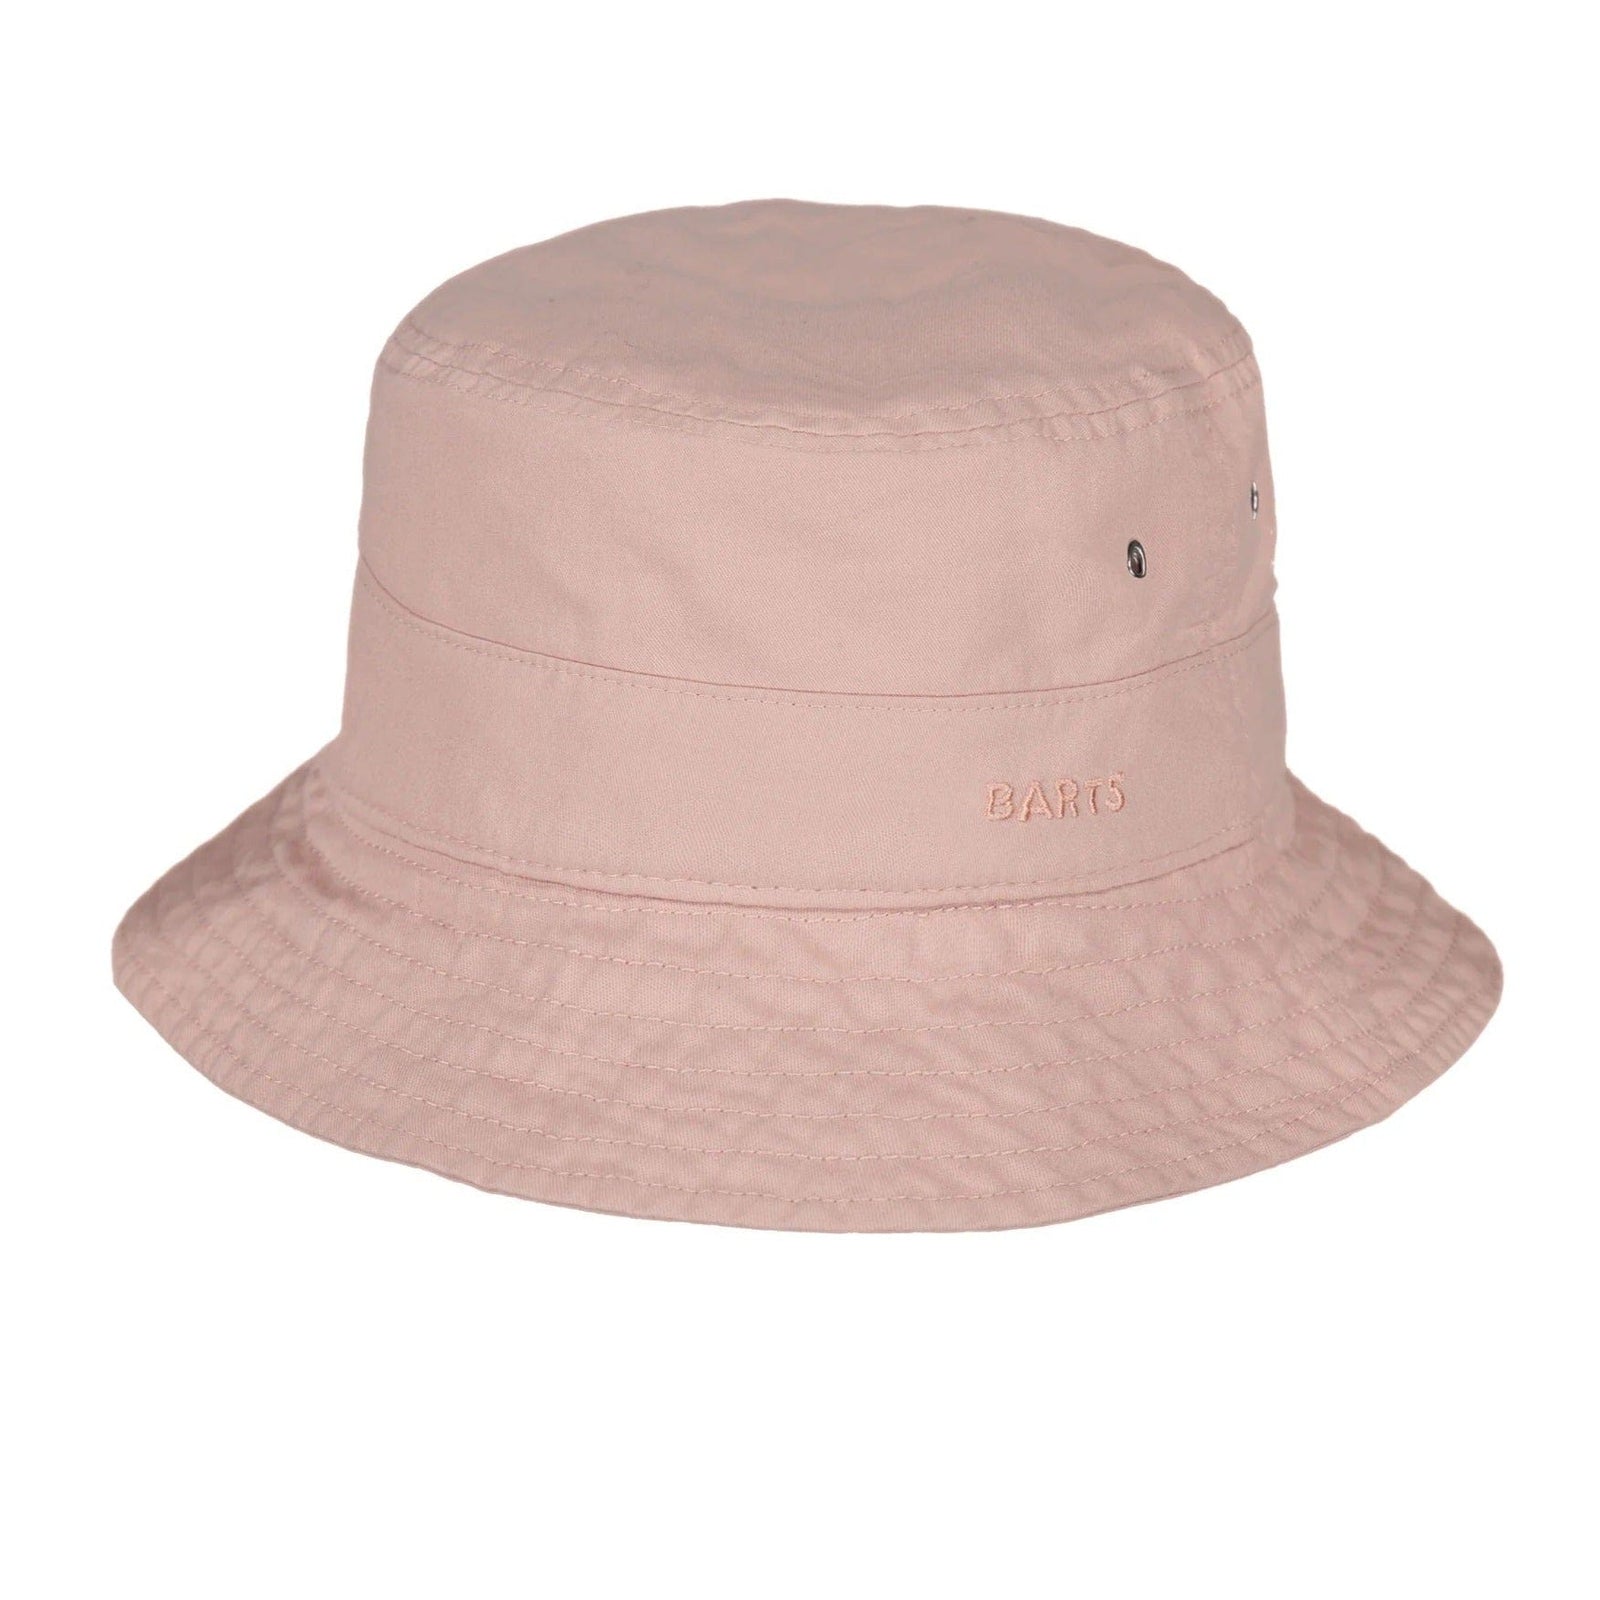 Barts Calombia Hat in Pink